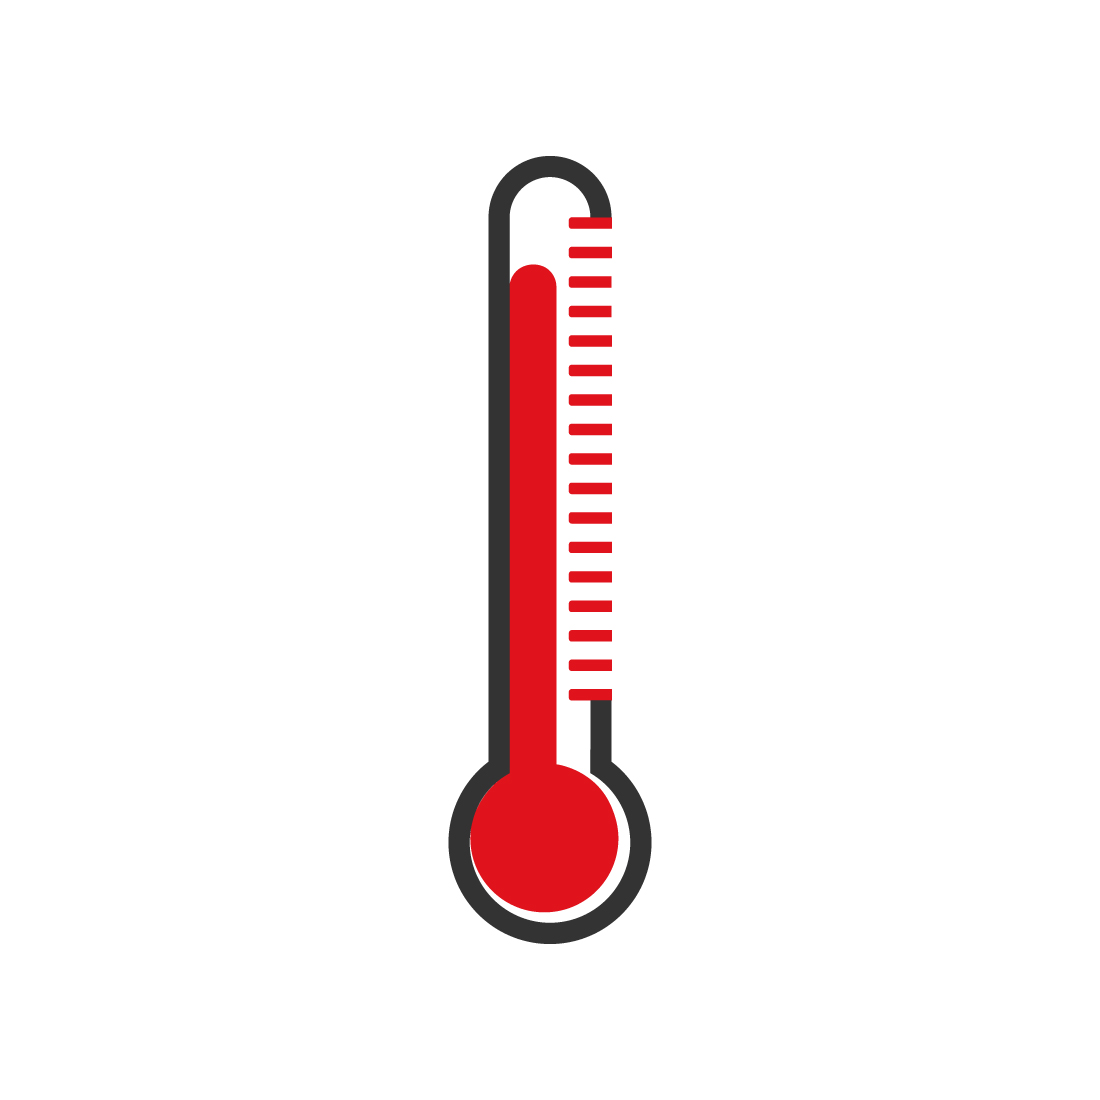 Professional Meter logo design Thermometer logo design vector icon Meter logo black and red color template best company royalty preview image.